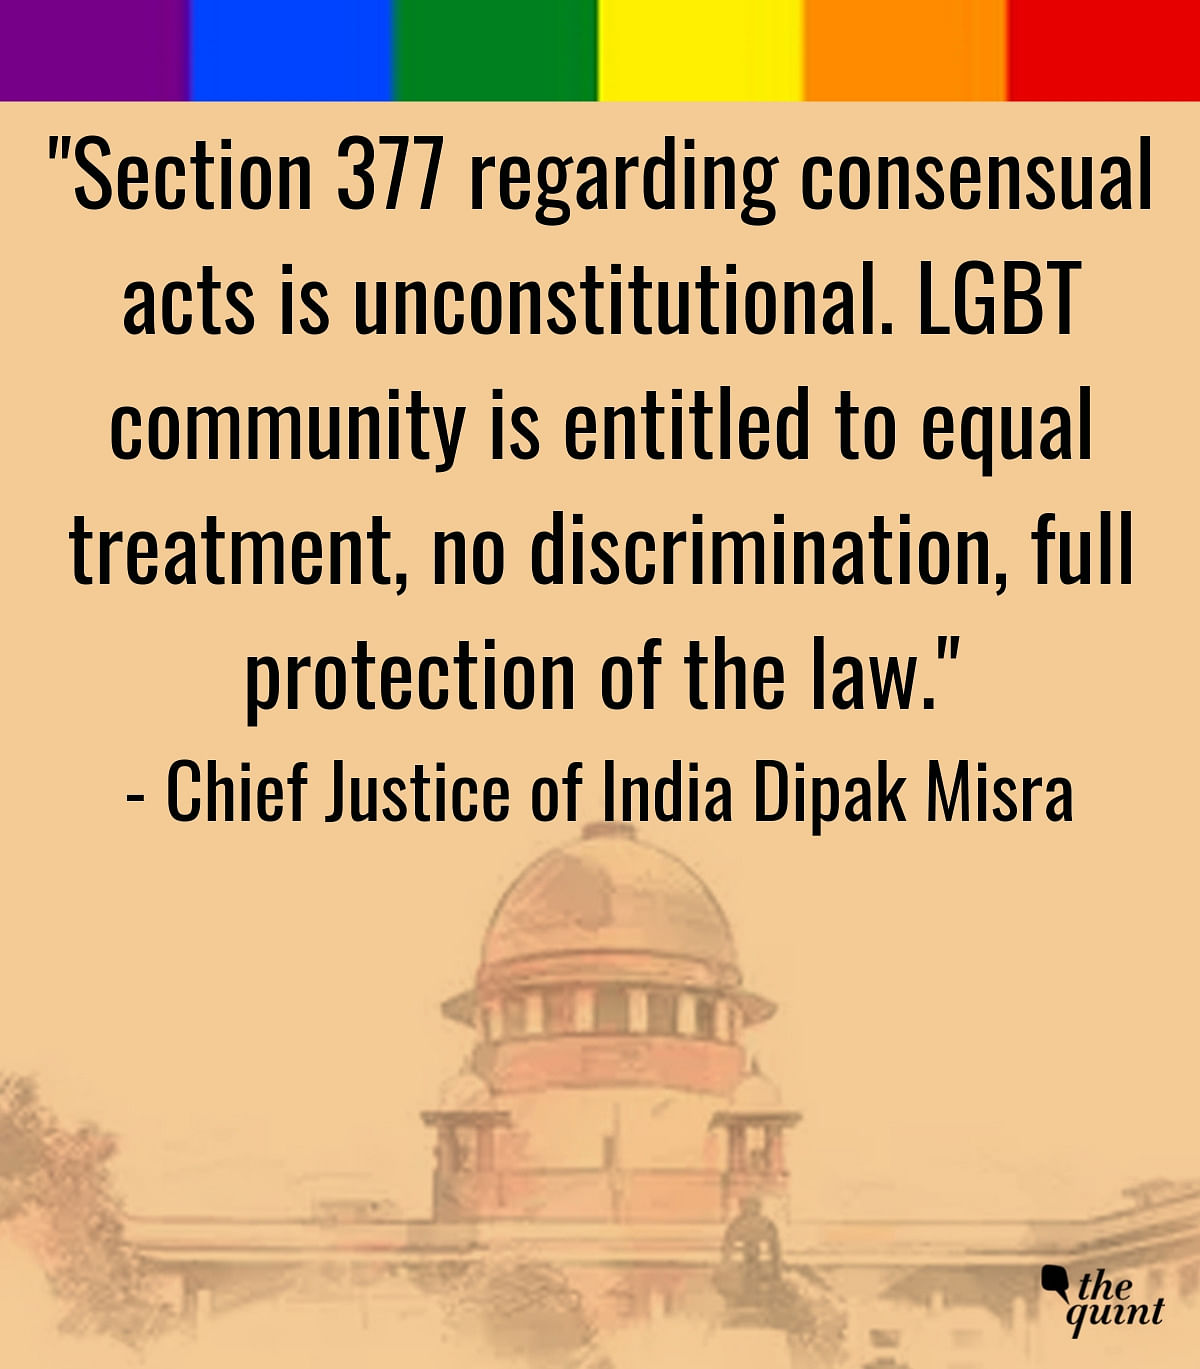 Read the most powerful quotes from the Justices of the Supreme Court of India on Section 377.